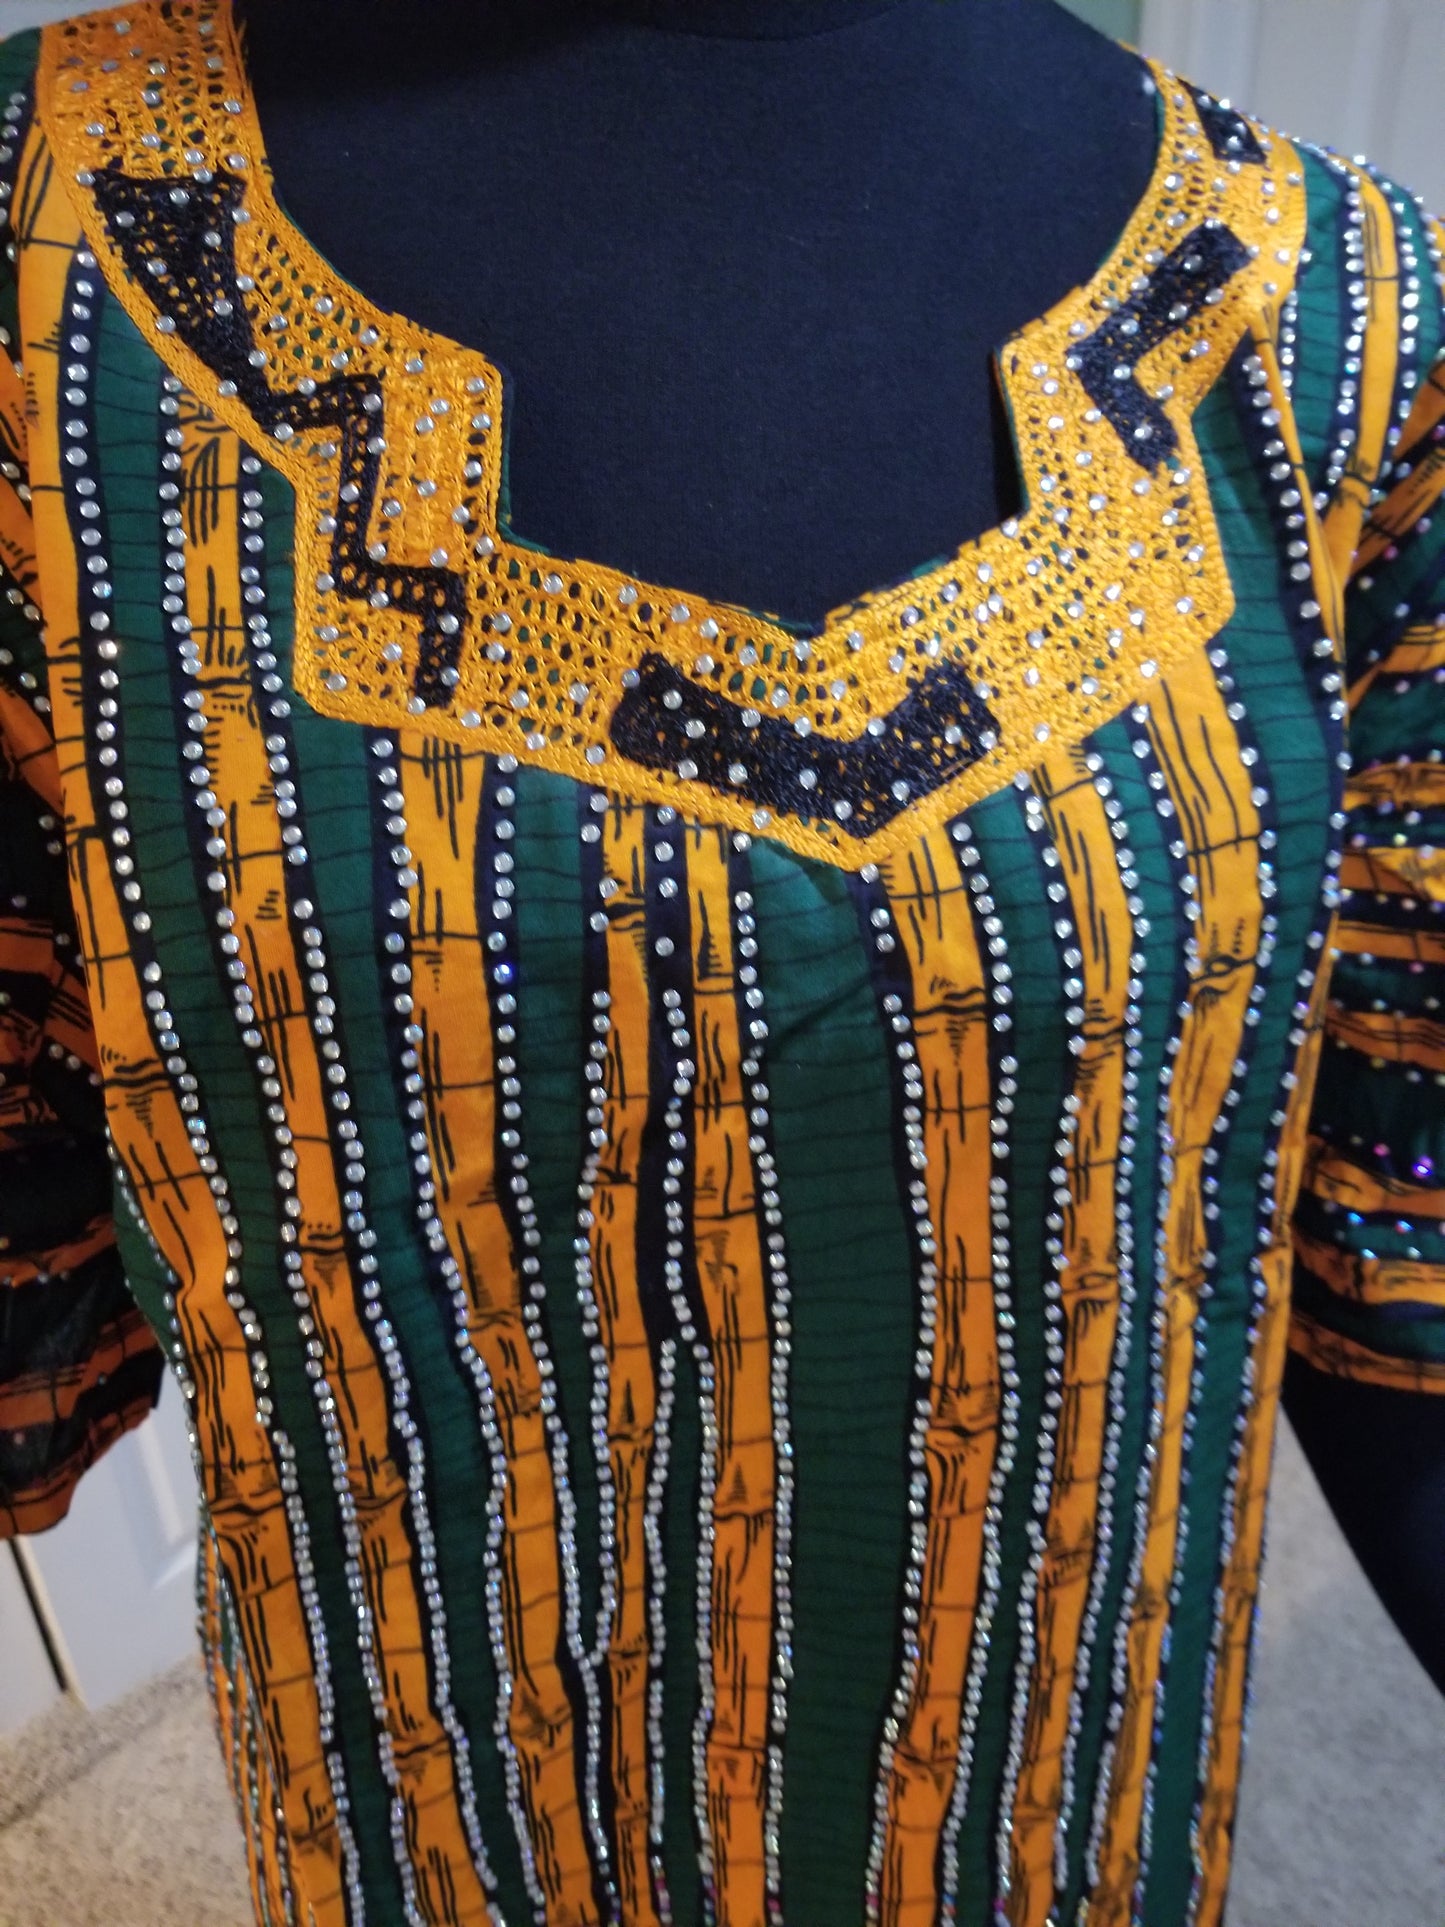 Sale sale: green/orange embroidered Ankara-dress, embellished with shinning Swarovski stones to perfection! Fit Burst 48" and 60" lenght shoulder to floor. Made with Quality hitarget Ankara. Comes with a matching headtie.